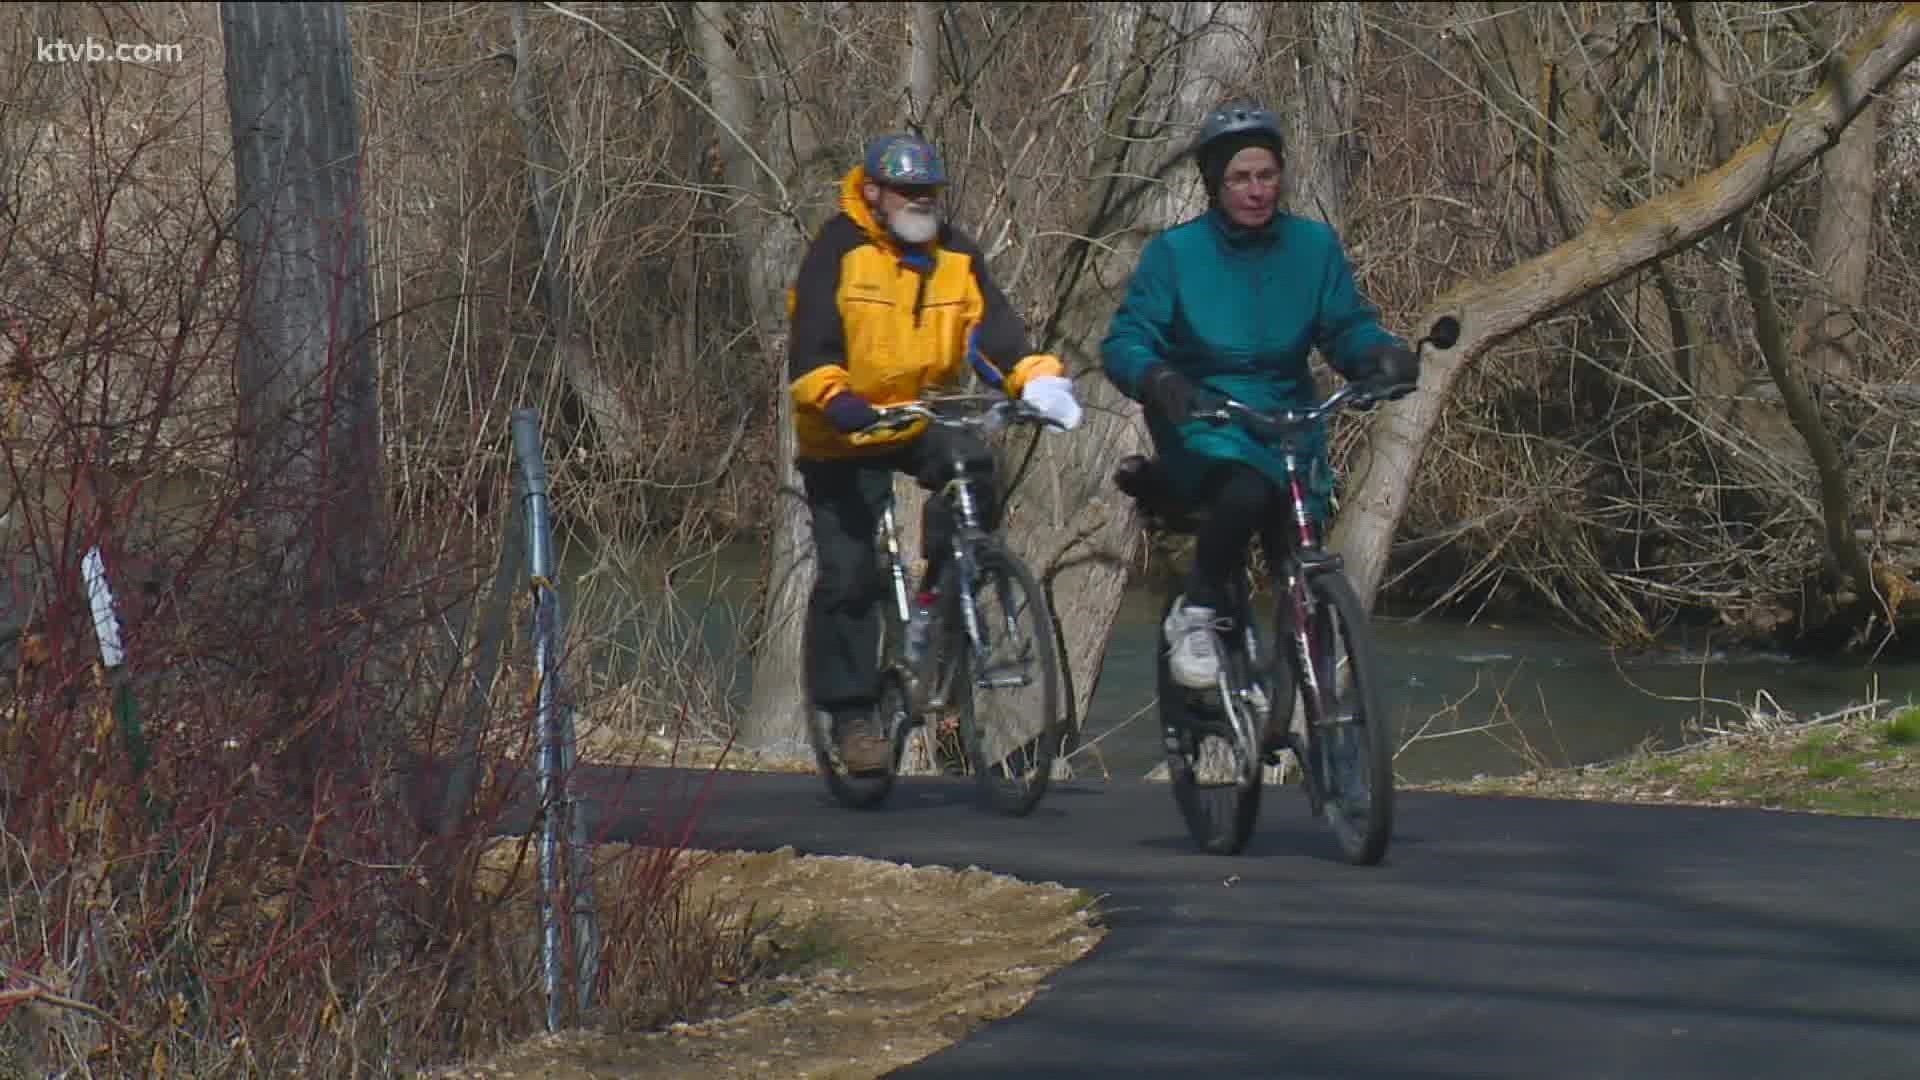 Boise City Council will hear public testimony on the Boise Pathways Master Plan, which hopes to bring more than 110 miles of biking and walking travel in the city.